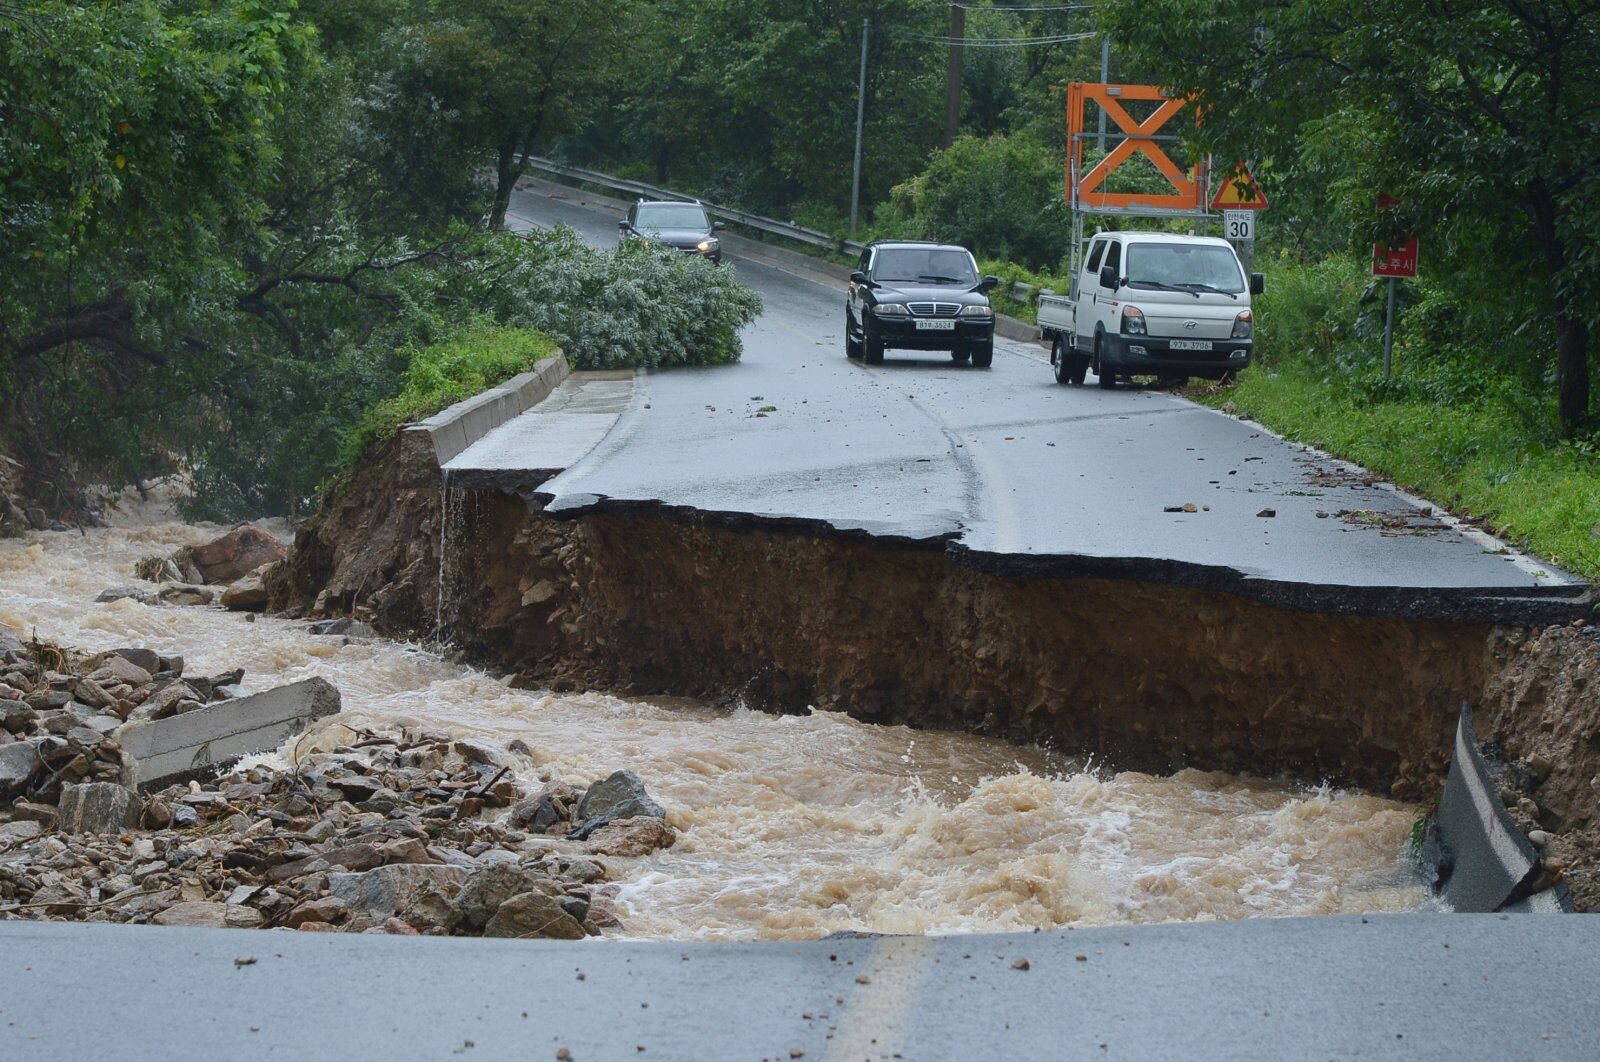 Collapsed road due to heavy rain in Chungju on August 2.